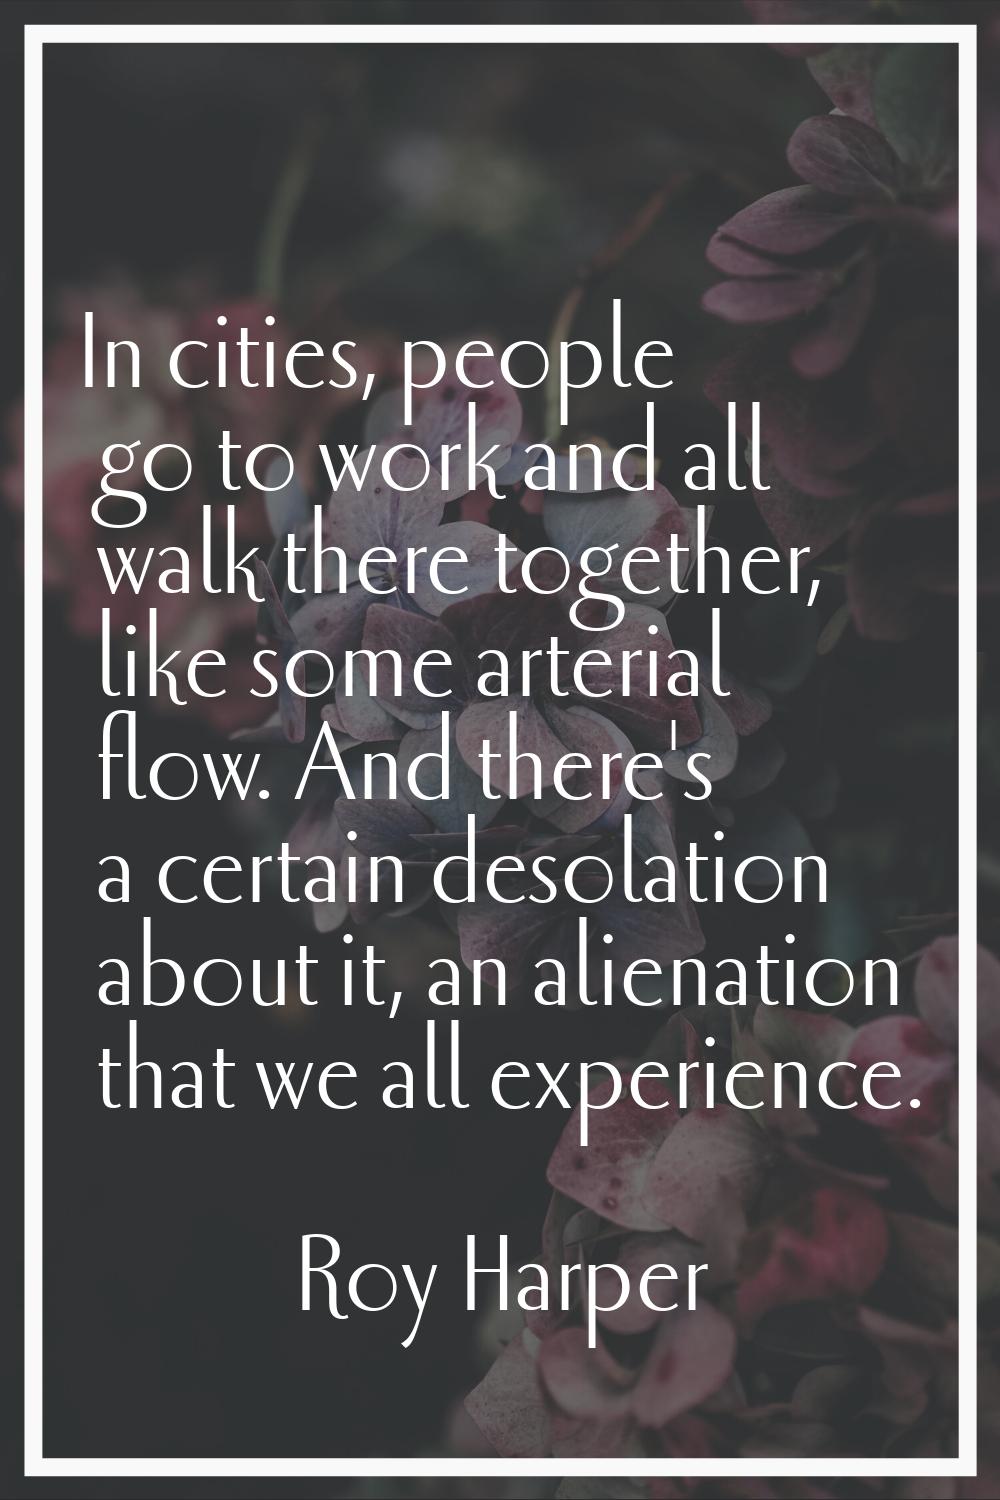 In cities, people go to work and all walk there together, like some arterial flow. And there's a ce